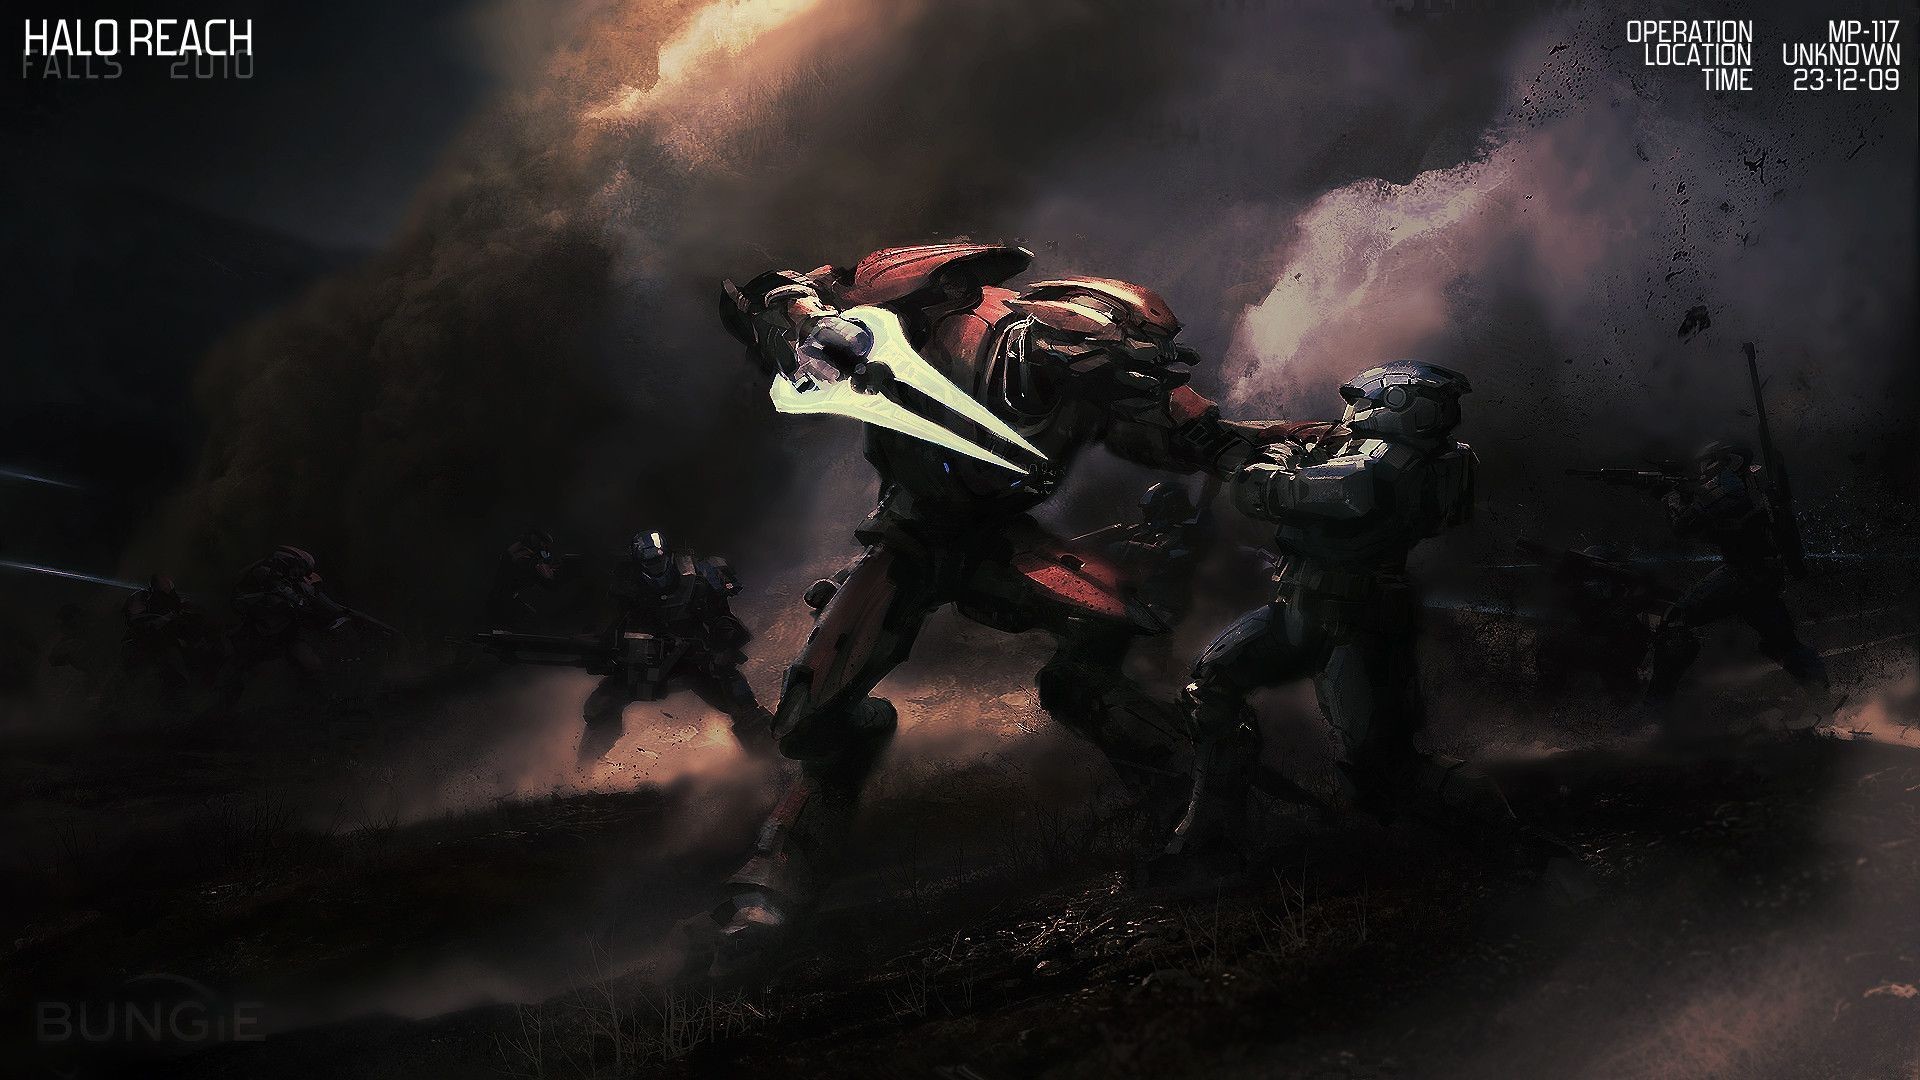 1920x1080 Halo Reach Backgrounds - Wallpaper Cave